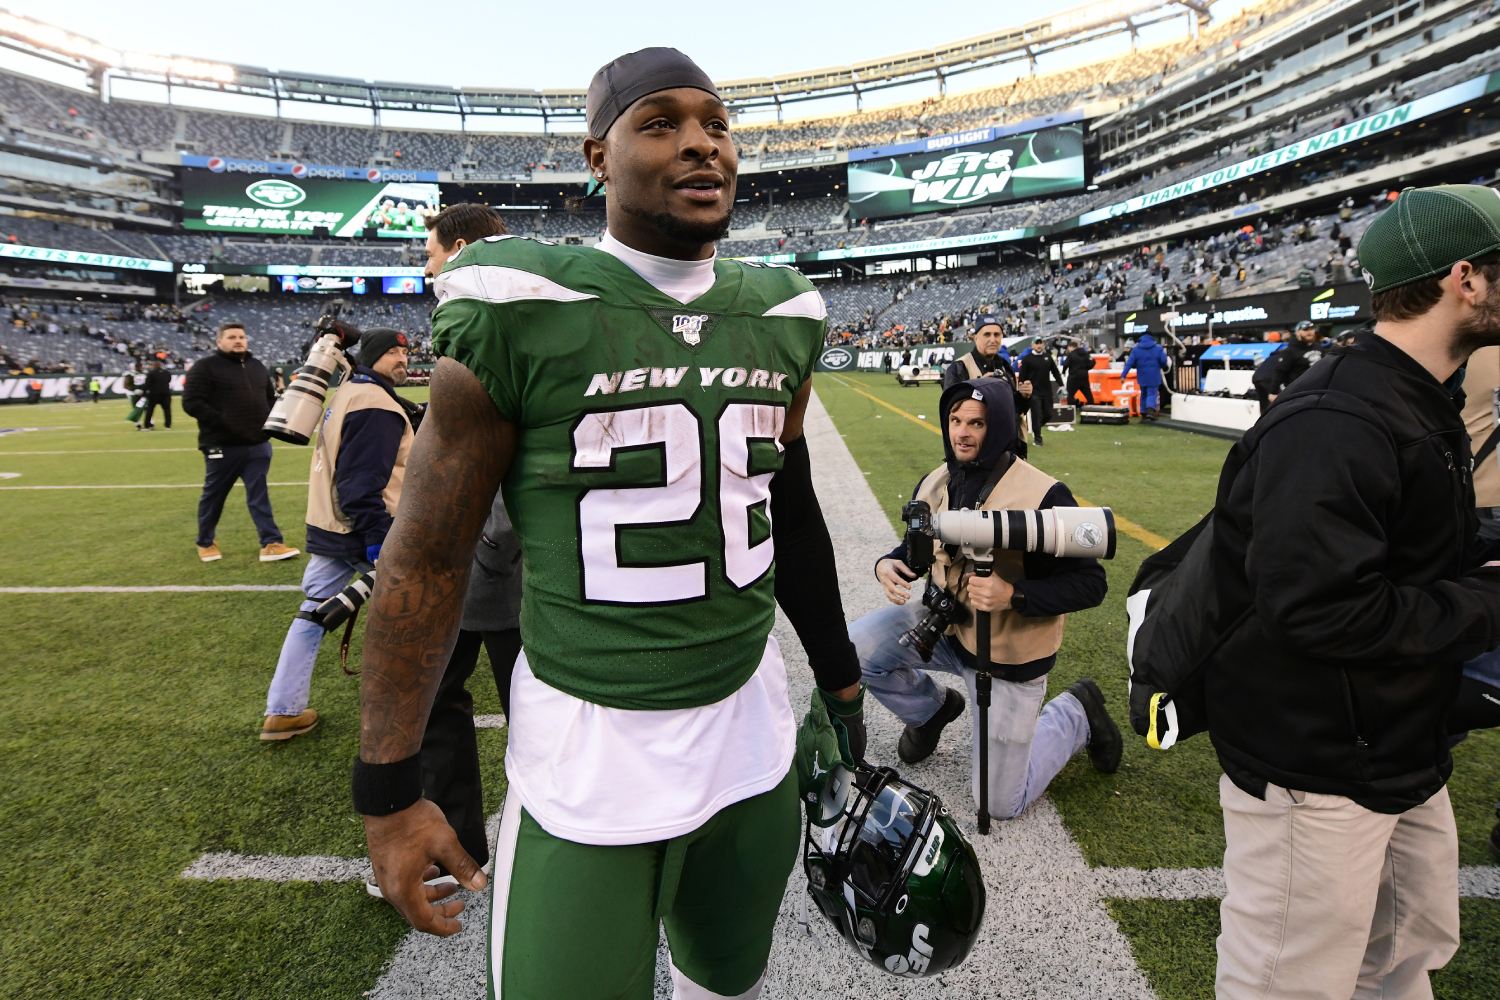 The New York Jets are reportedly looking at trading Le'Veon Bell. He, however, told them that he wanted traded before the rumors surfaced.